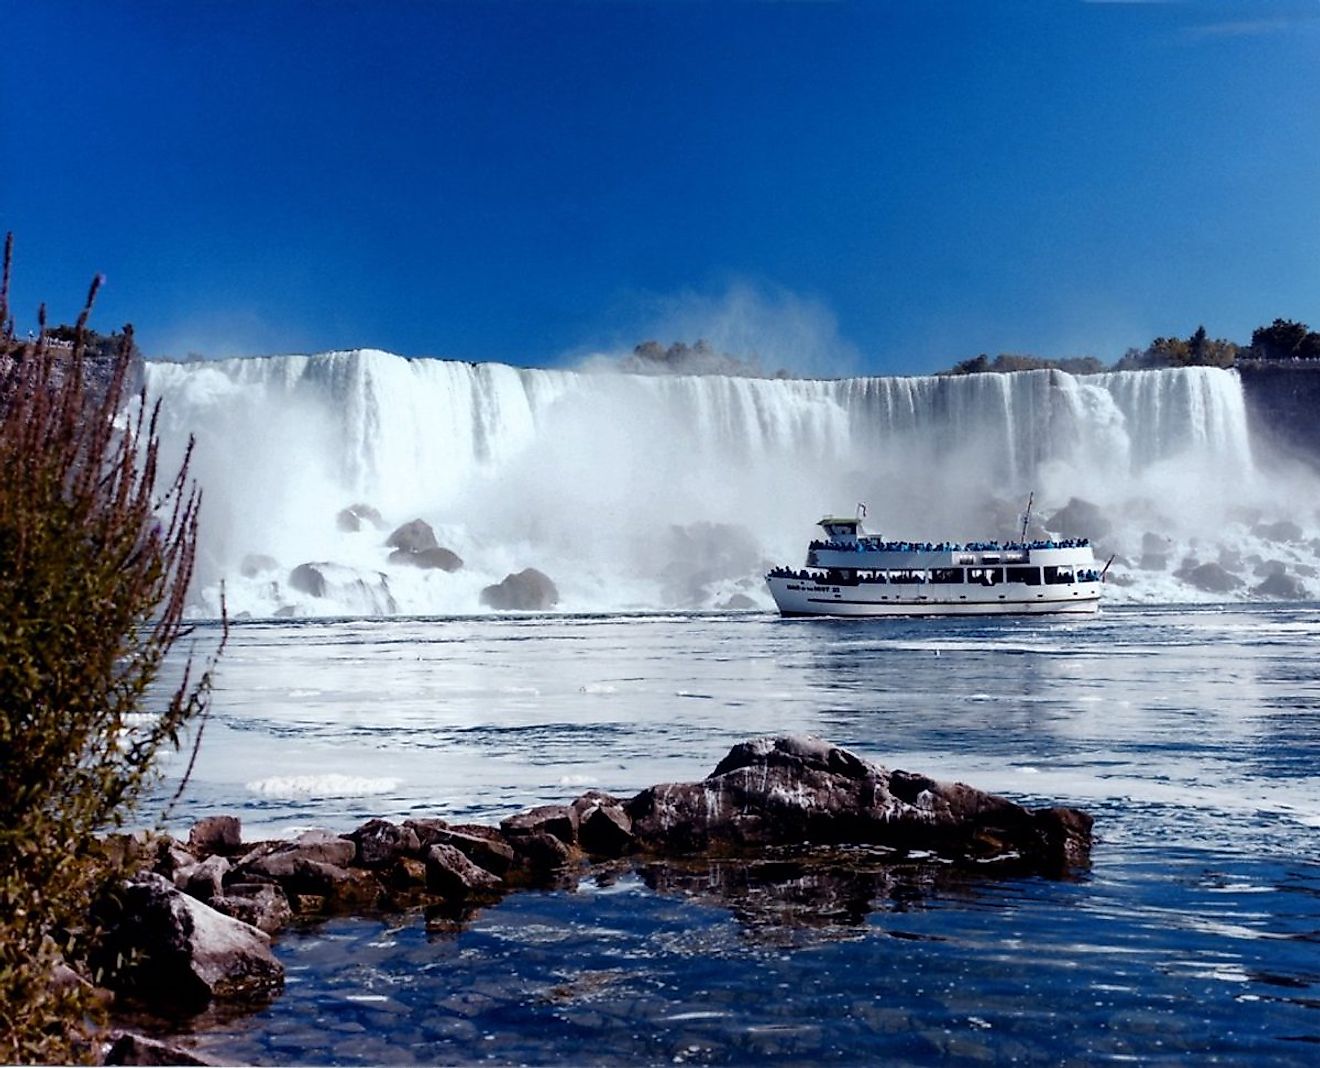 The Maid of the Mist traveling past the American Falls.